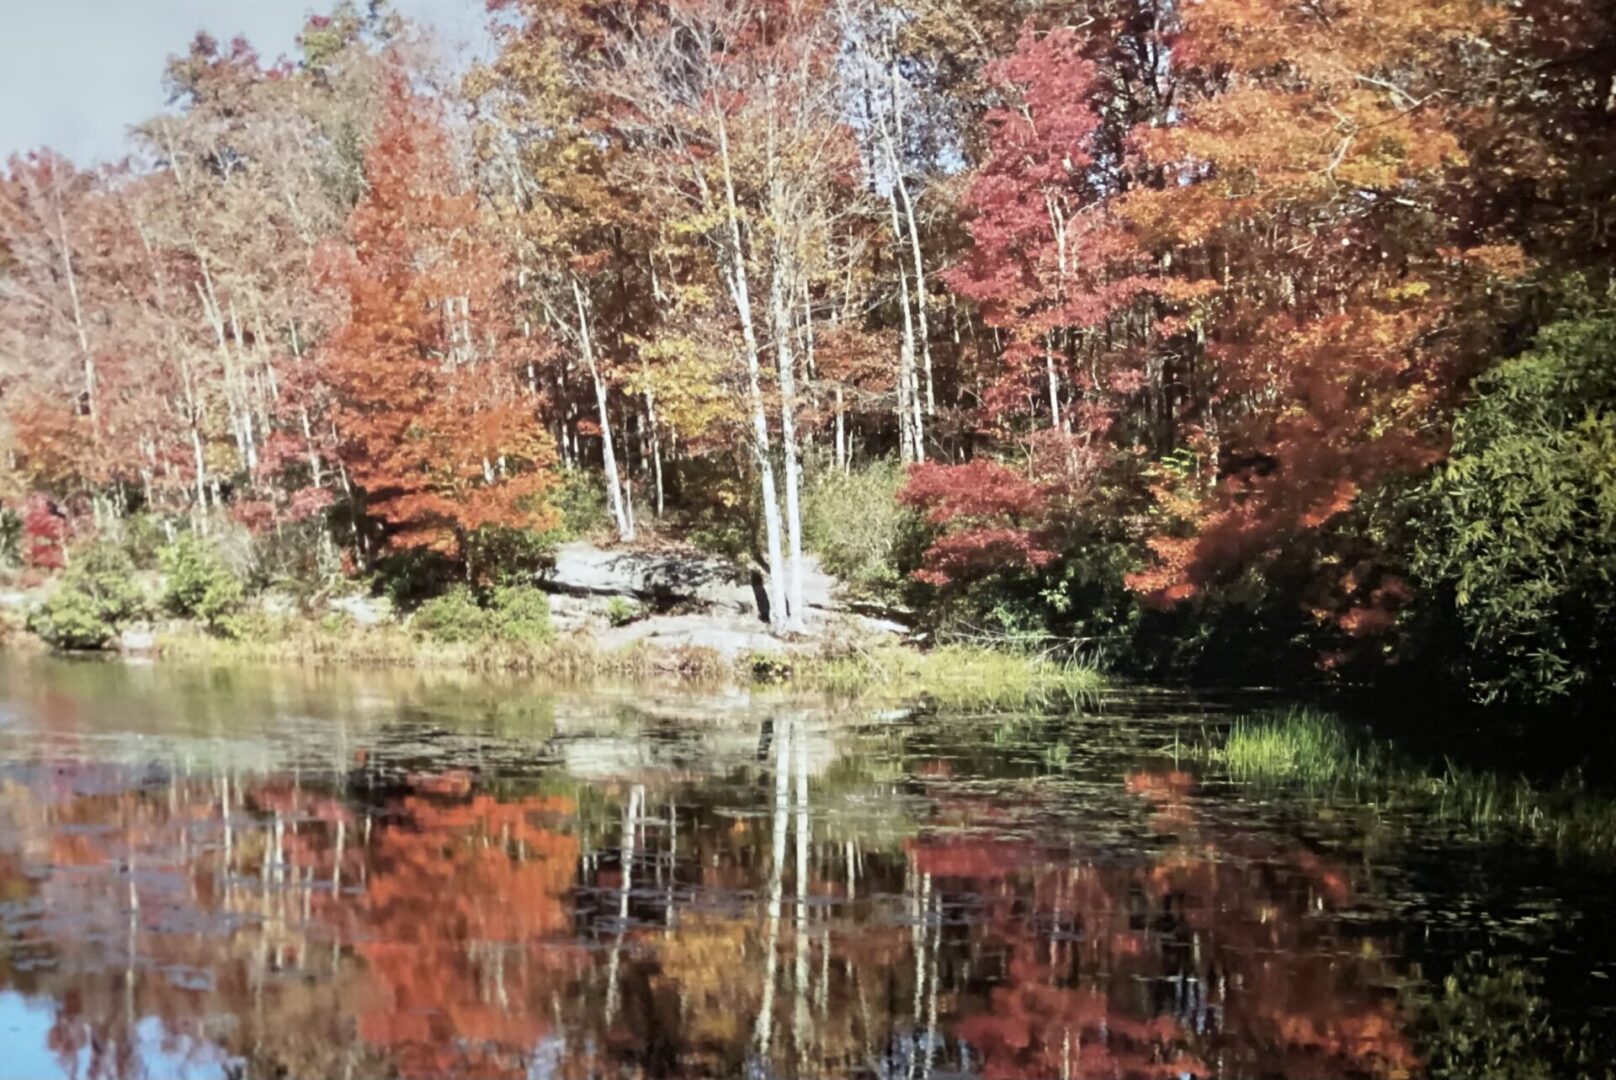 A lake surrounded by trees with fall colors.